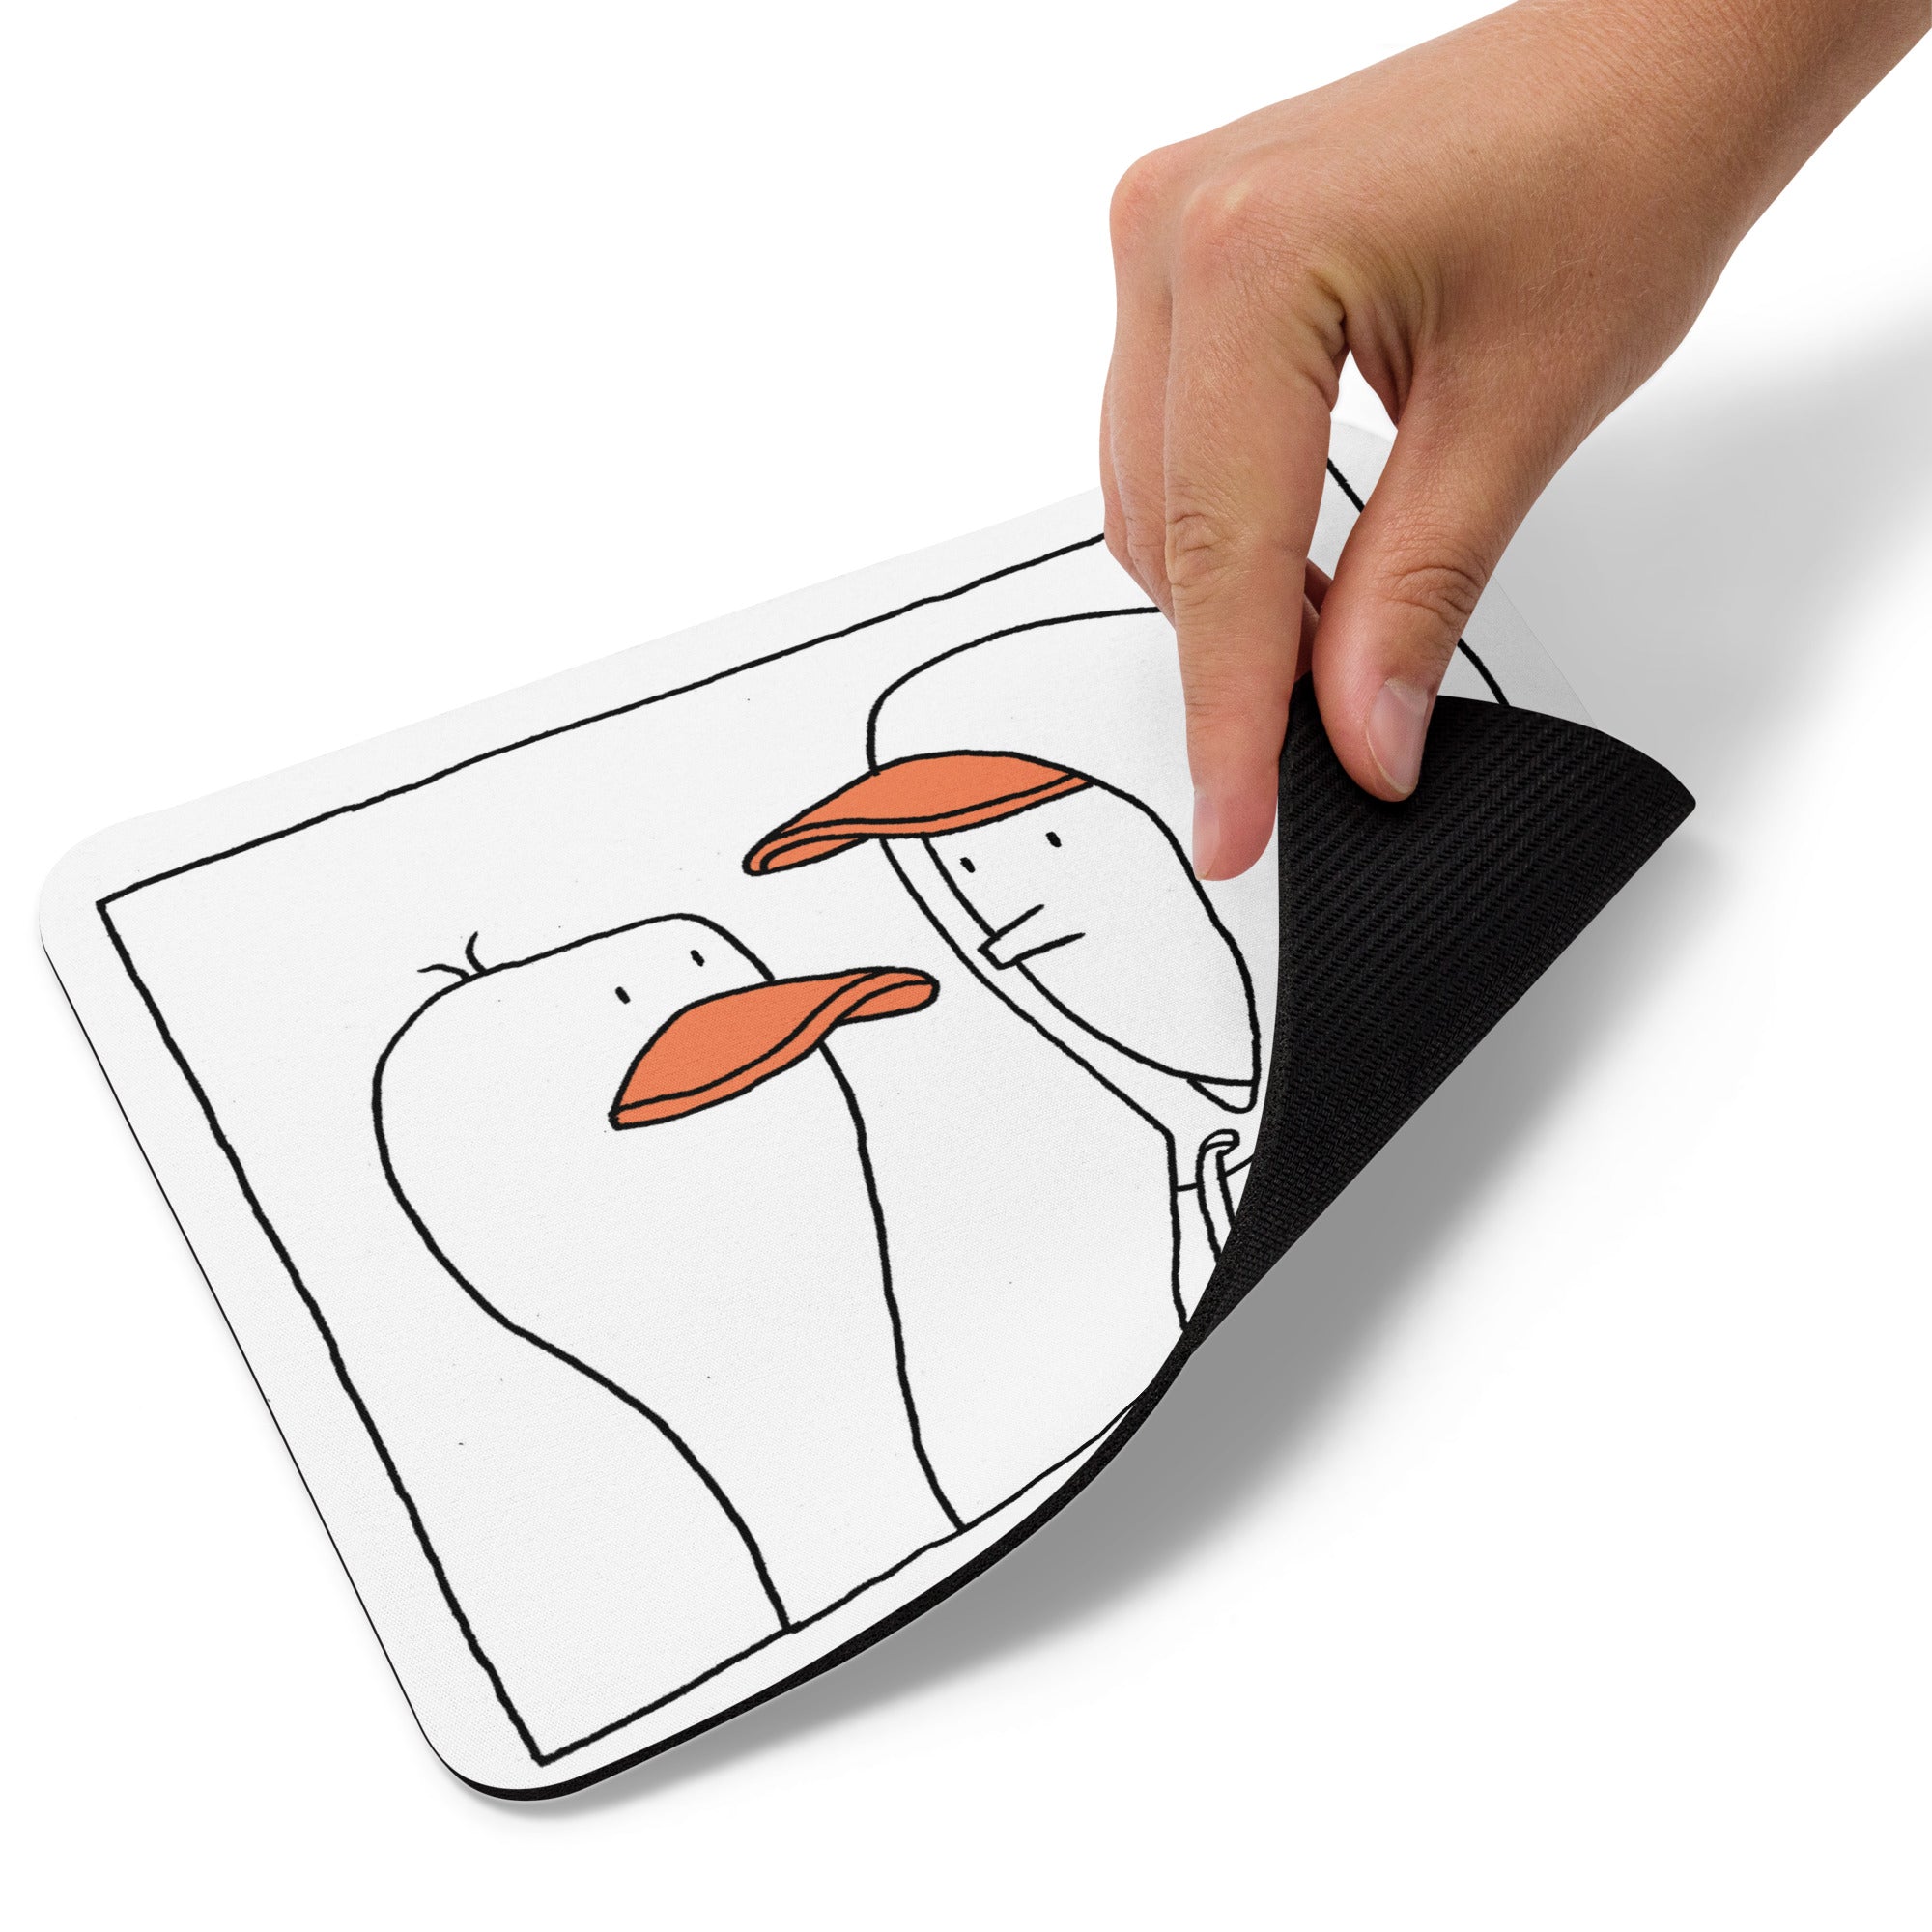 Duck & Snap Mouse pad